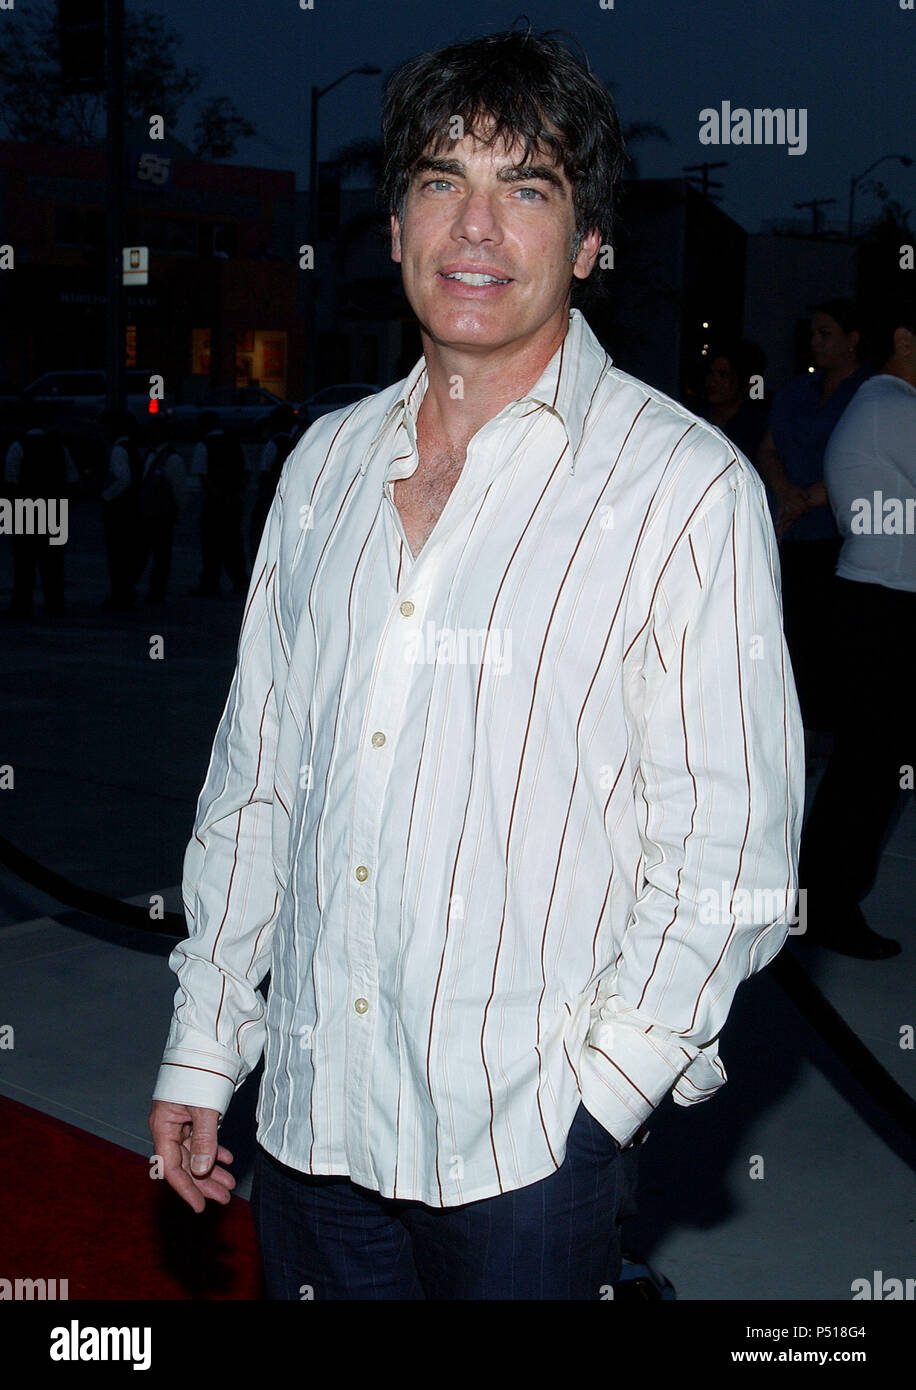 Peter Gallagher (OC) arriving at the ' 2003 Fox Summer tca Party ' at the Pacific Design Center in Los Angeles. july 18, 2003.GallagherPeter OC323 Red Carpet Event, Vertical, USA, Film Industry, Celebrities,  Photography, Bestof, Arts Culture and Entertainment, Topix Celebrities fashion /  Vertical, Best of, Event in Hollywood Life - California,  Red Carpet and backstage, USA, Film Industry, Celebrities,  movie celebrities, TV celebrities, Music celebrities, Photography, Bestof, Arts Culture and Entertainment,  Topix, vertical, one person,, from the years , 2003 to 2005, inquiry tsuni@Gamma-US Stock Photo